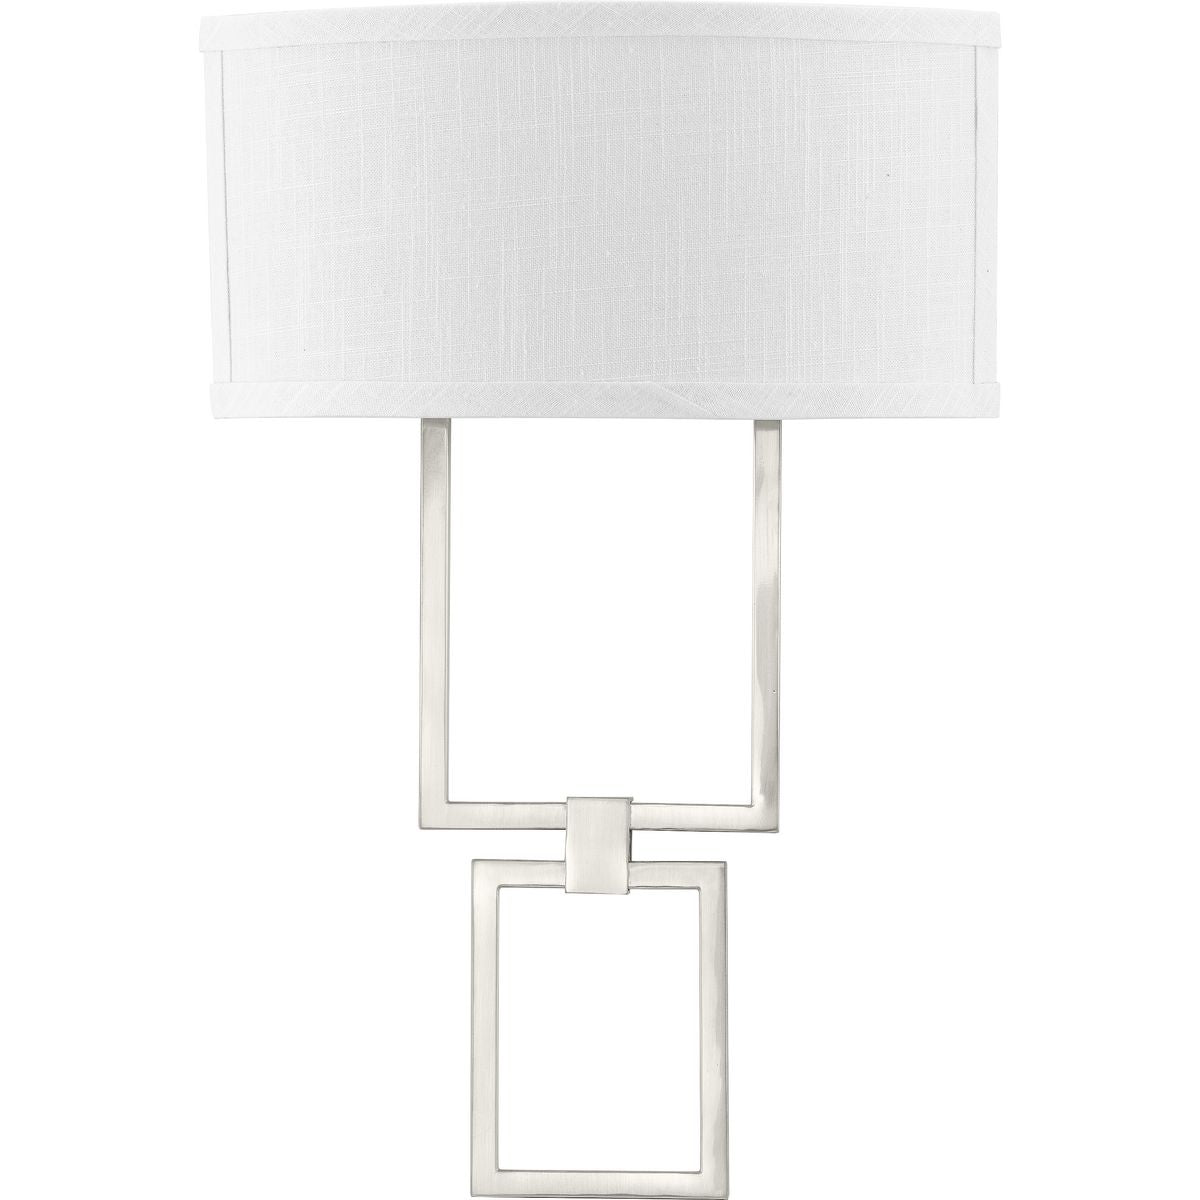 PROGRESS LIGHTING P710054-009-30 Brushed Nickel LED Shaded Sconce Collection Brushed Nickel One-Light Square Wall Sconce